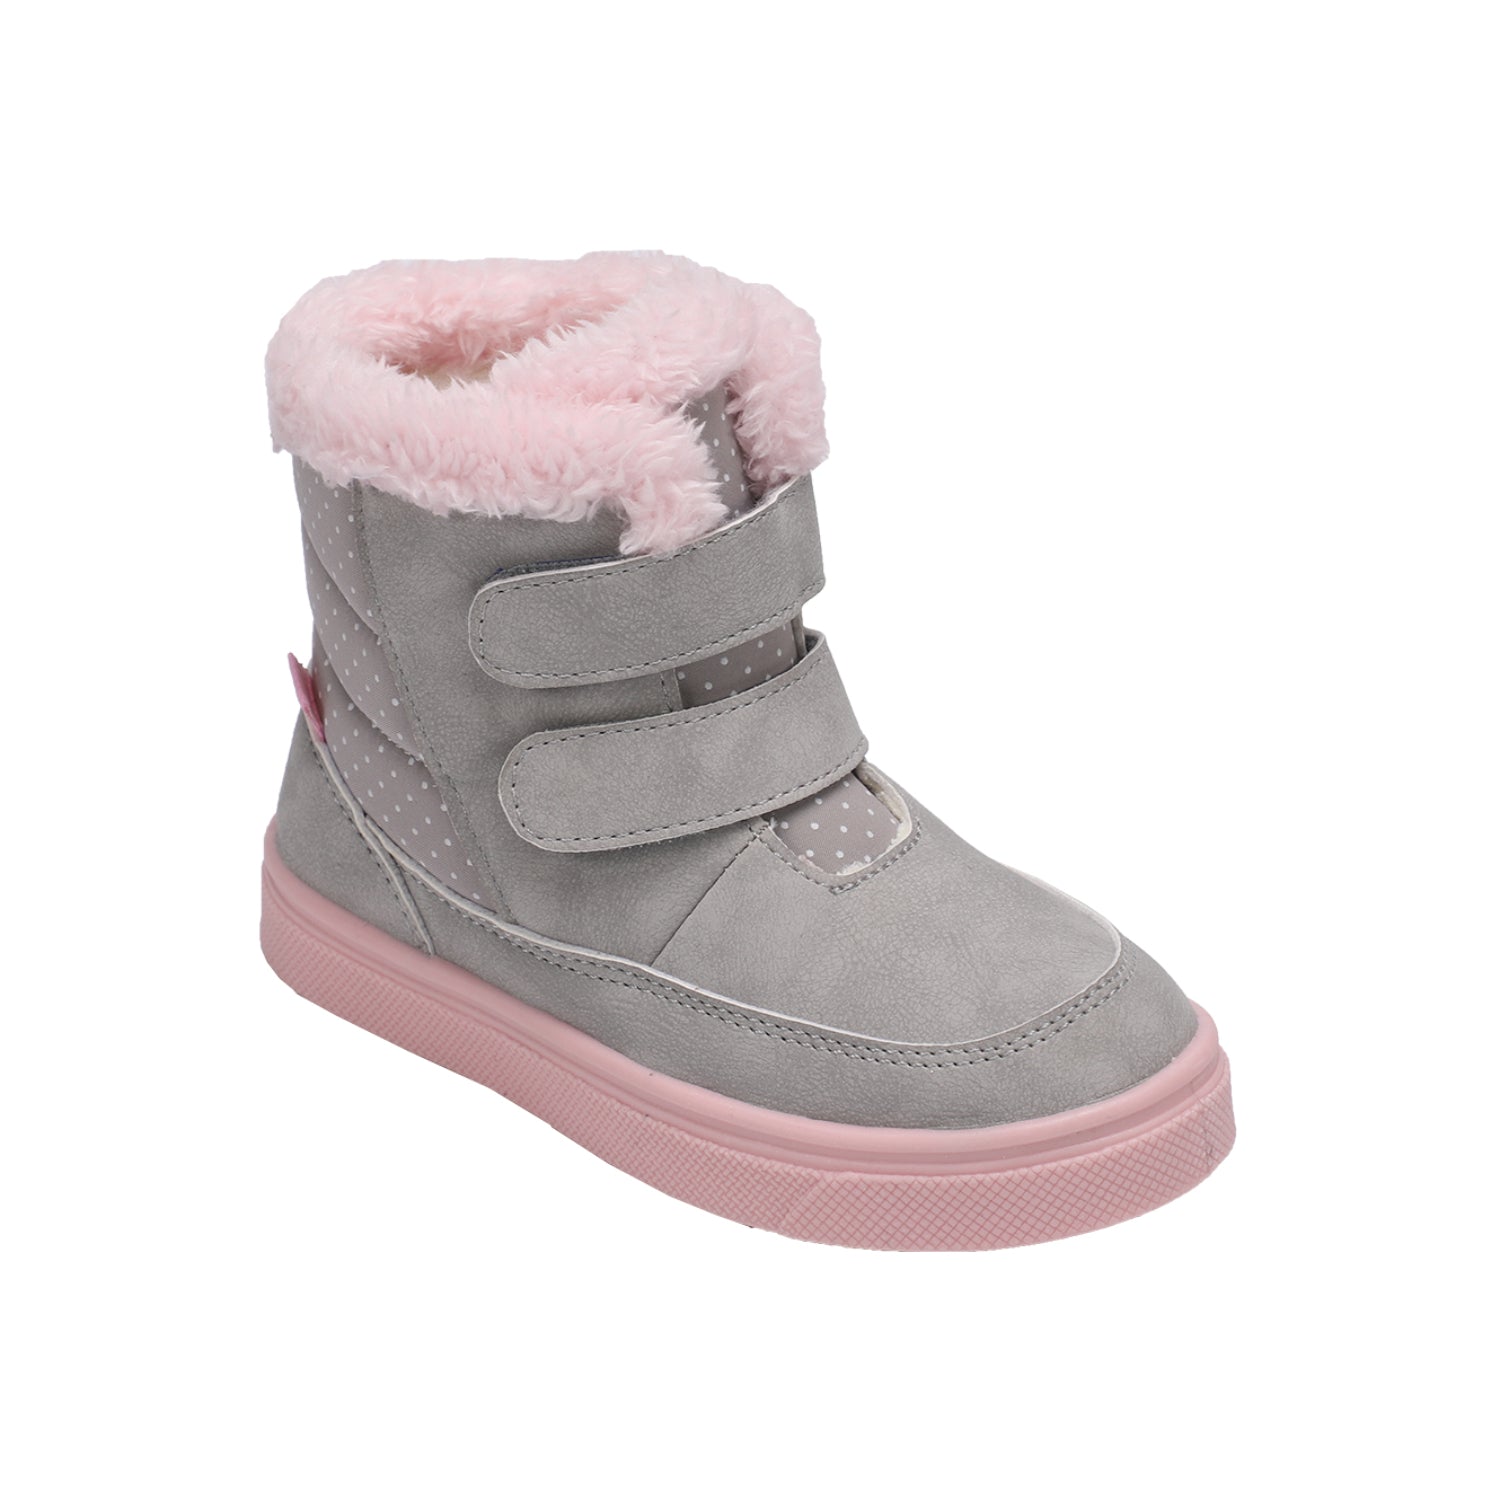 cngelg Infant Boots Snow Baby Girls Boys Warm Boots India | Ubuy